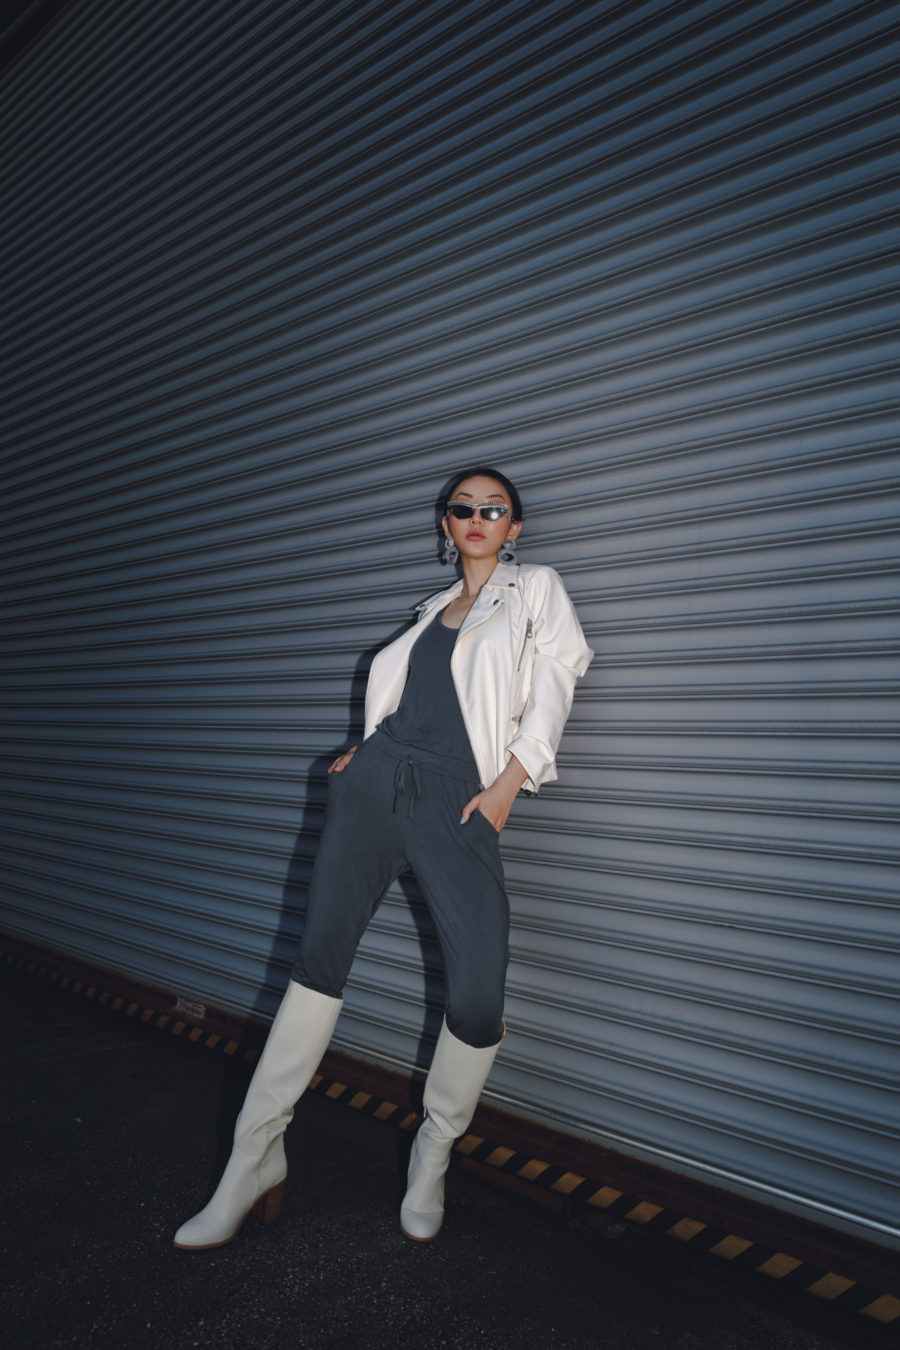 jessica wang wears knit jumpsuit and white leather jacket while sharing ways to transition your summer wardrobe to fall // Jessica Wang - Notjessfashion.com